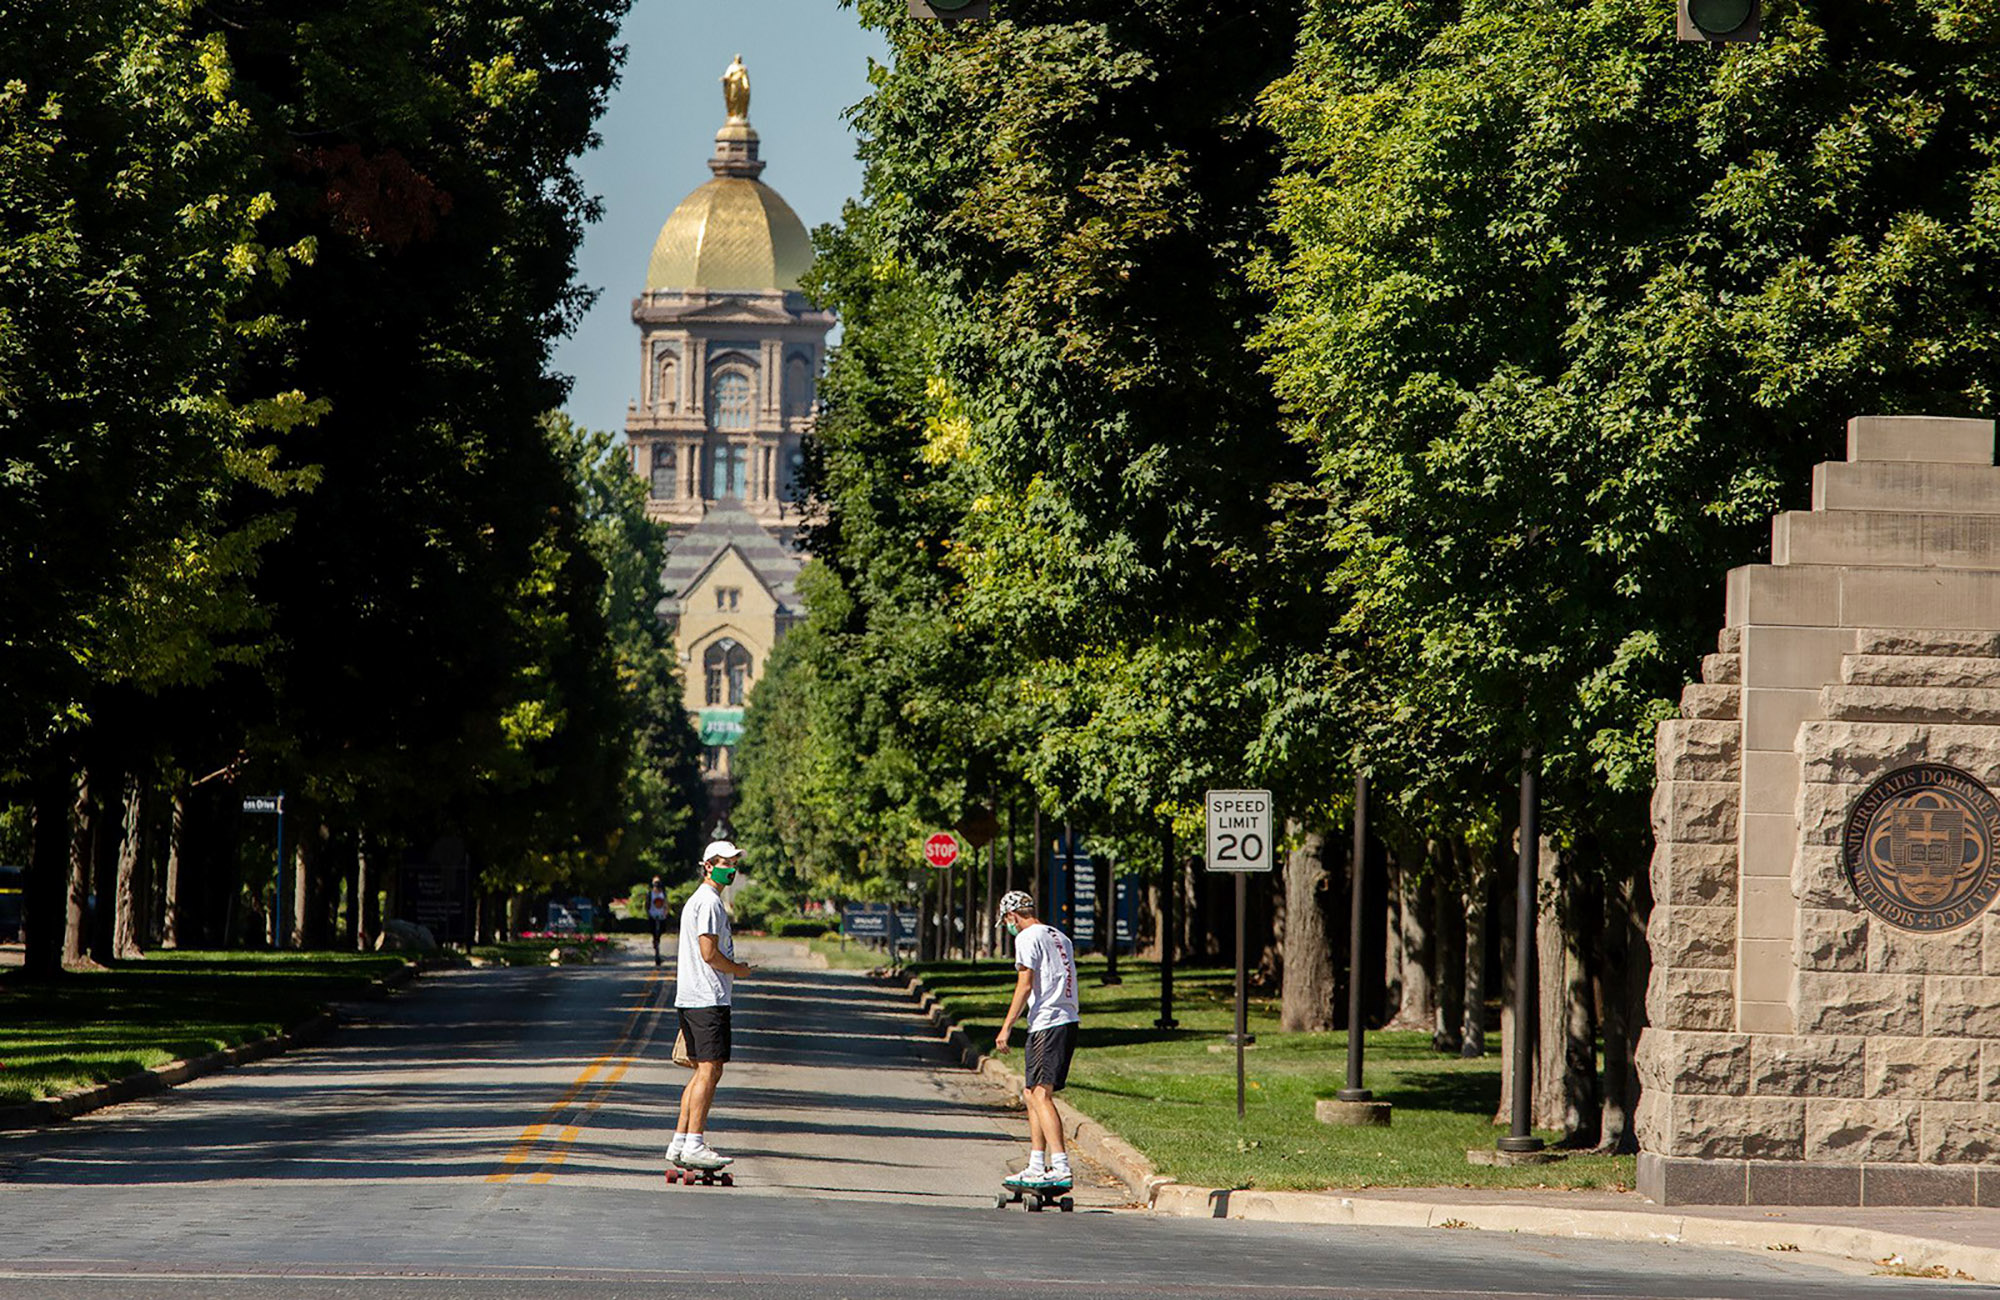 PHOTO: Students skate on campus at the University of Notre Dame in South Bend, Ind., Aug. 22, 2020.